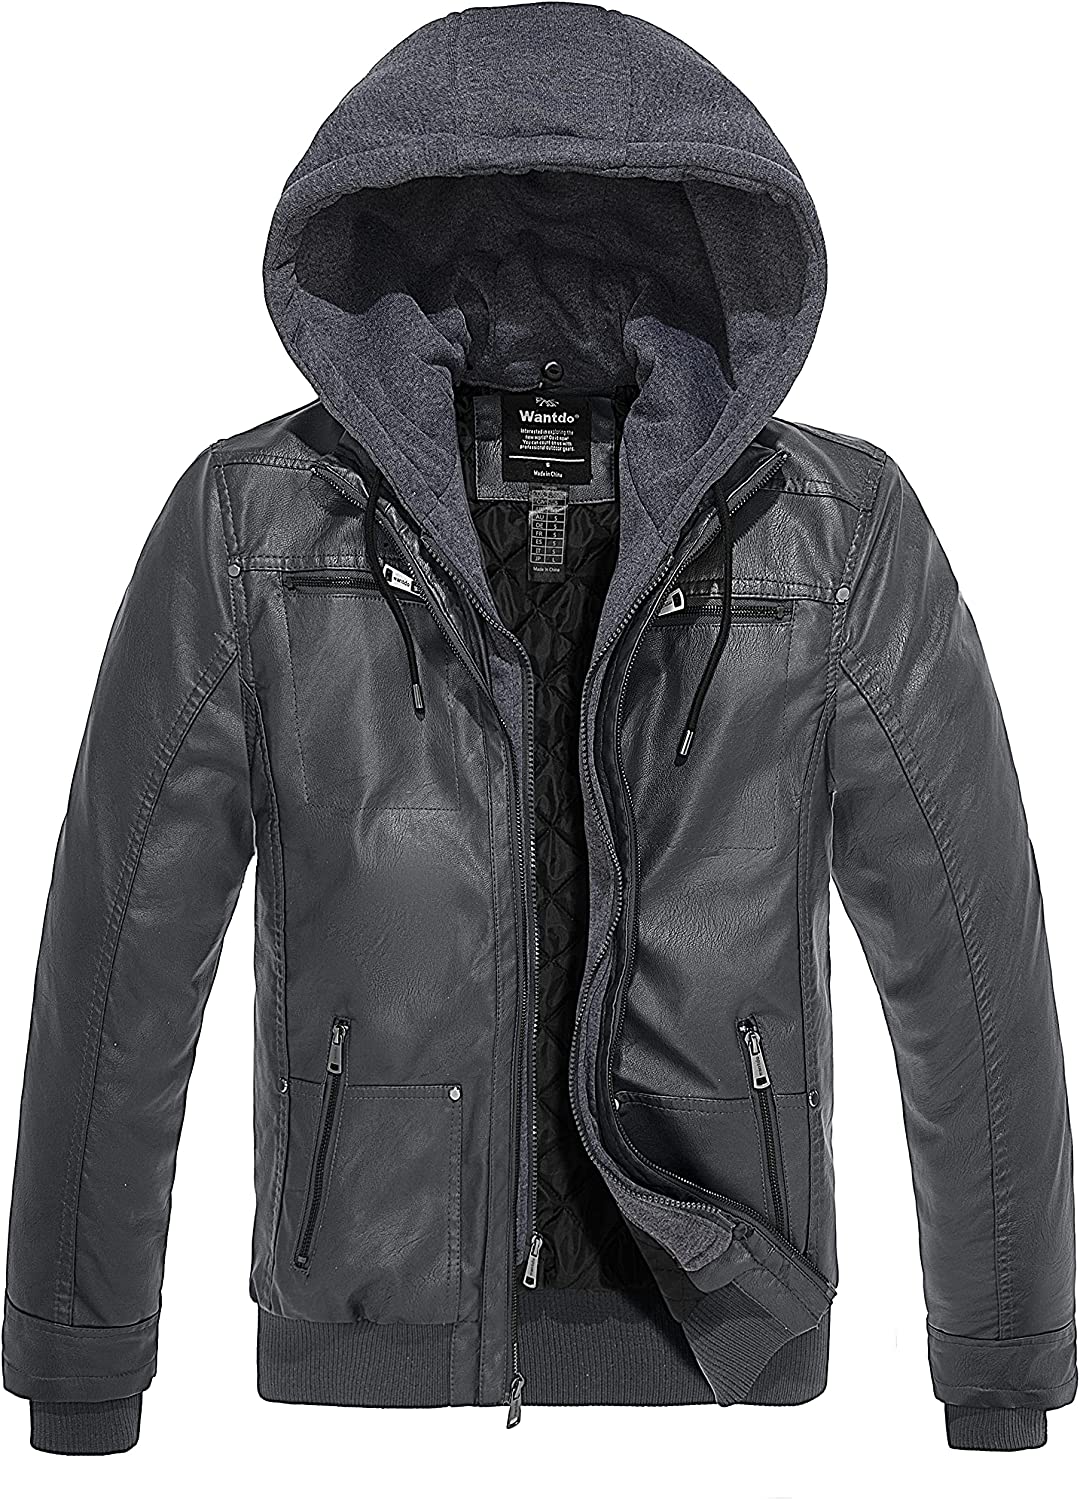 Wantdo Men\'s Faux Leather Jacket with Removable Hood Motorcycle Jacket  Casual Vi | eBay